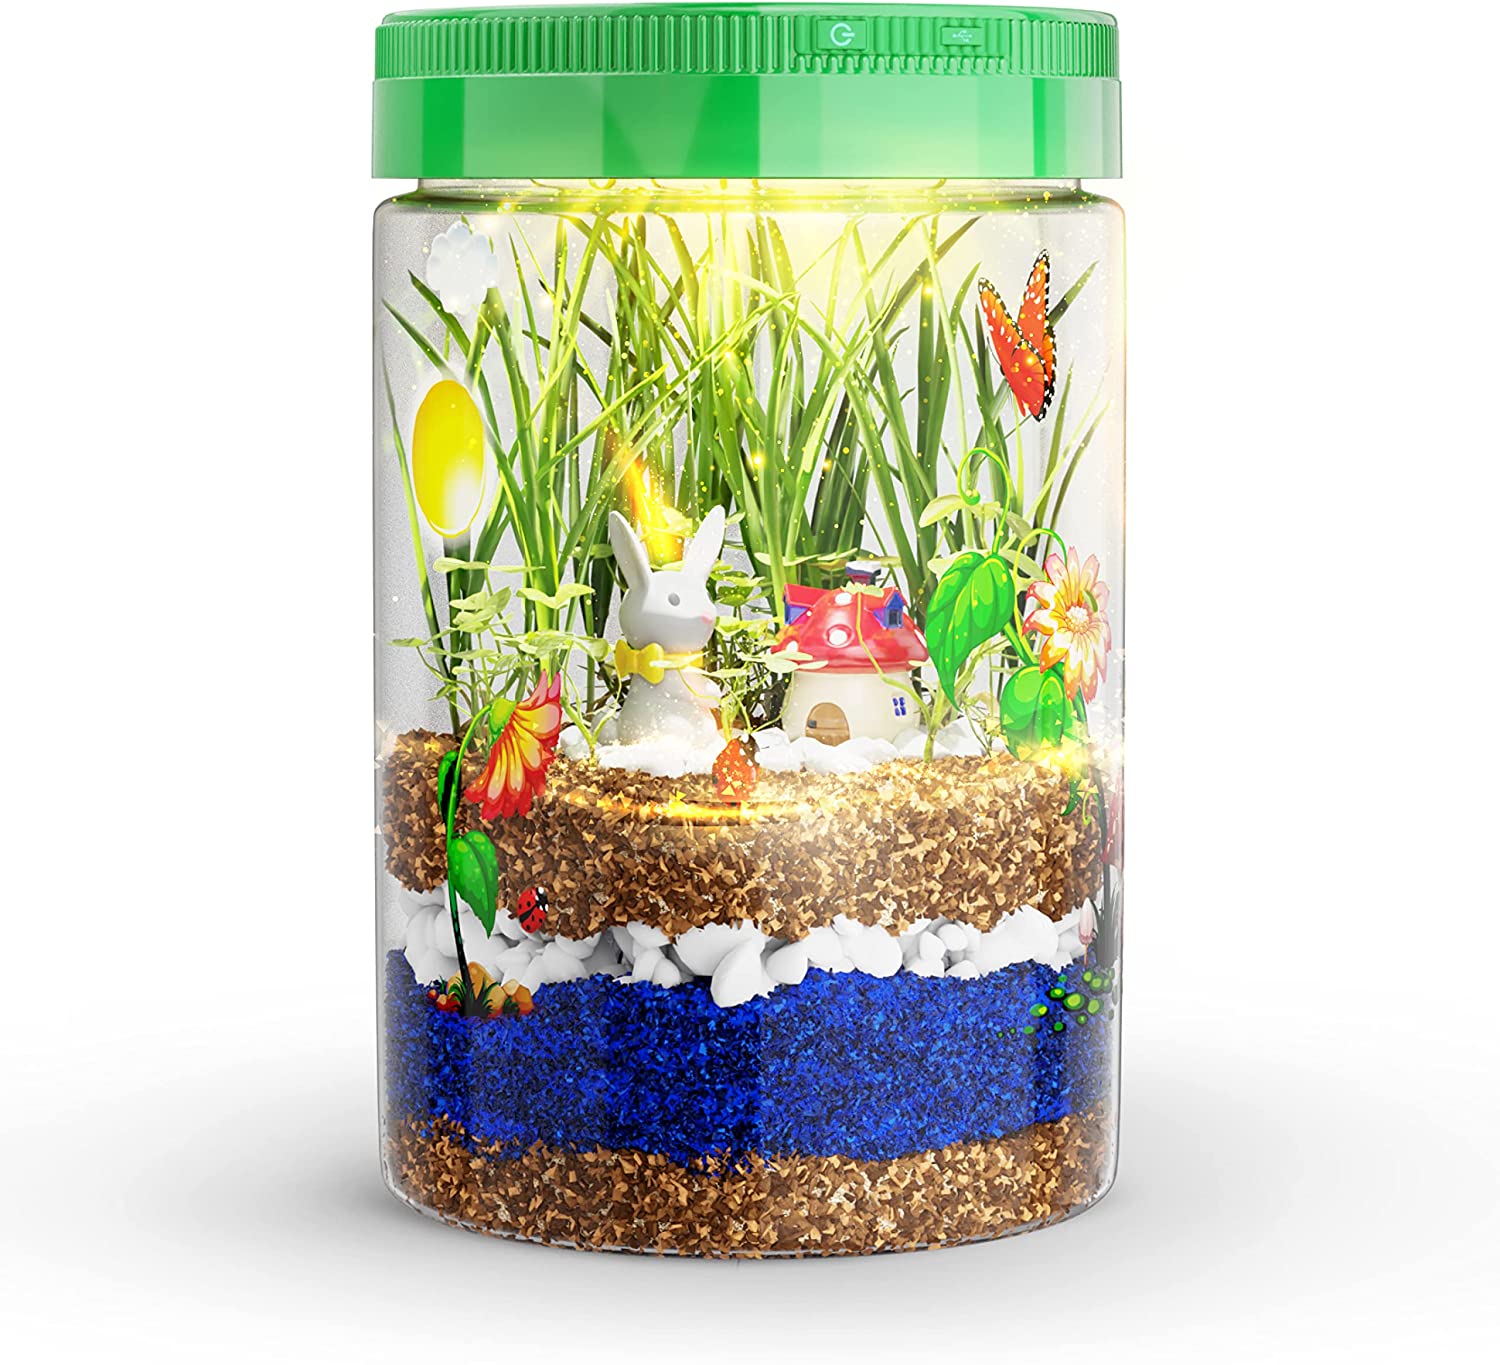 Light-up Terrarium Kit for Kids with LED Light on Lid - Create Your Own Customized Mini Garden in a Jar That Glows at Night - Science Kits for Boys & Girls - Gardening Gifts for Kids - Children Toys - image 4 of 9